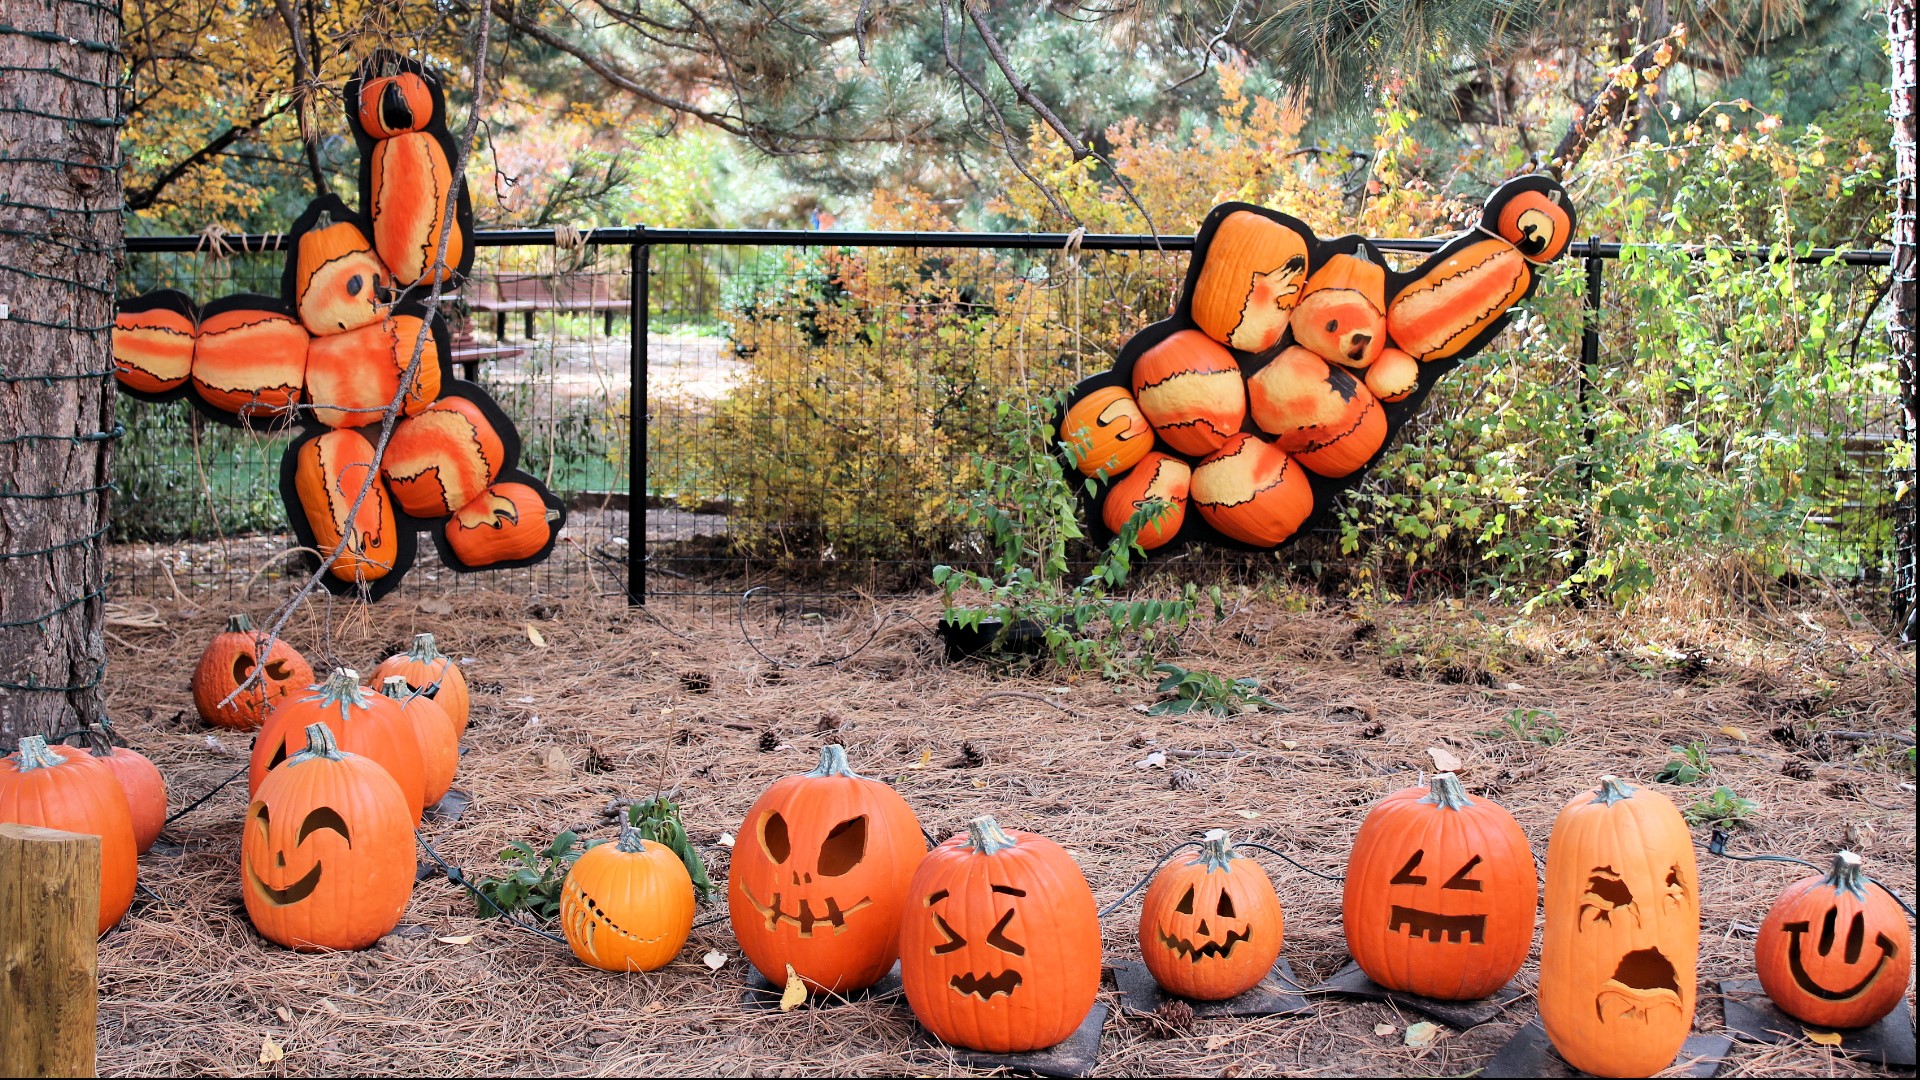 Denver Zoo has plenty events coming up during the month of October. From trick-or-treating to a monster masquerade, the Denver Zoo will have fall events for all.